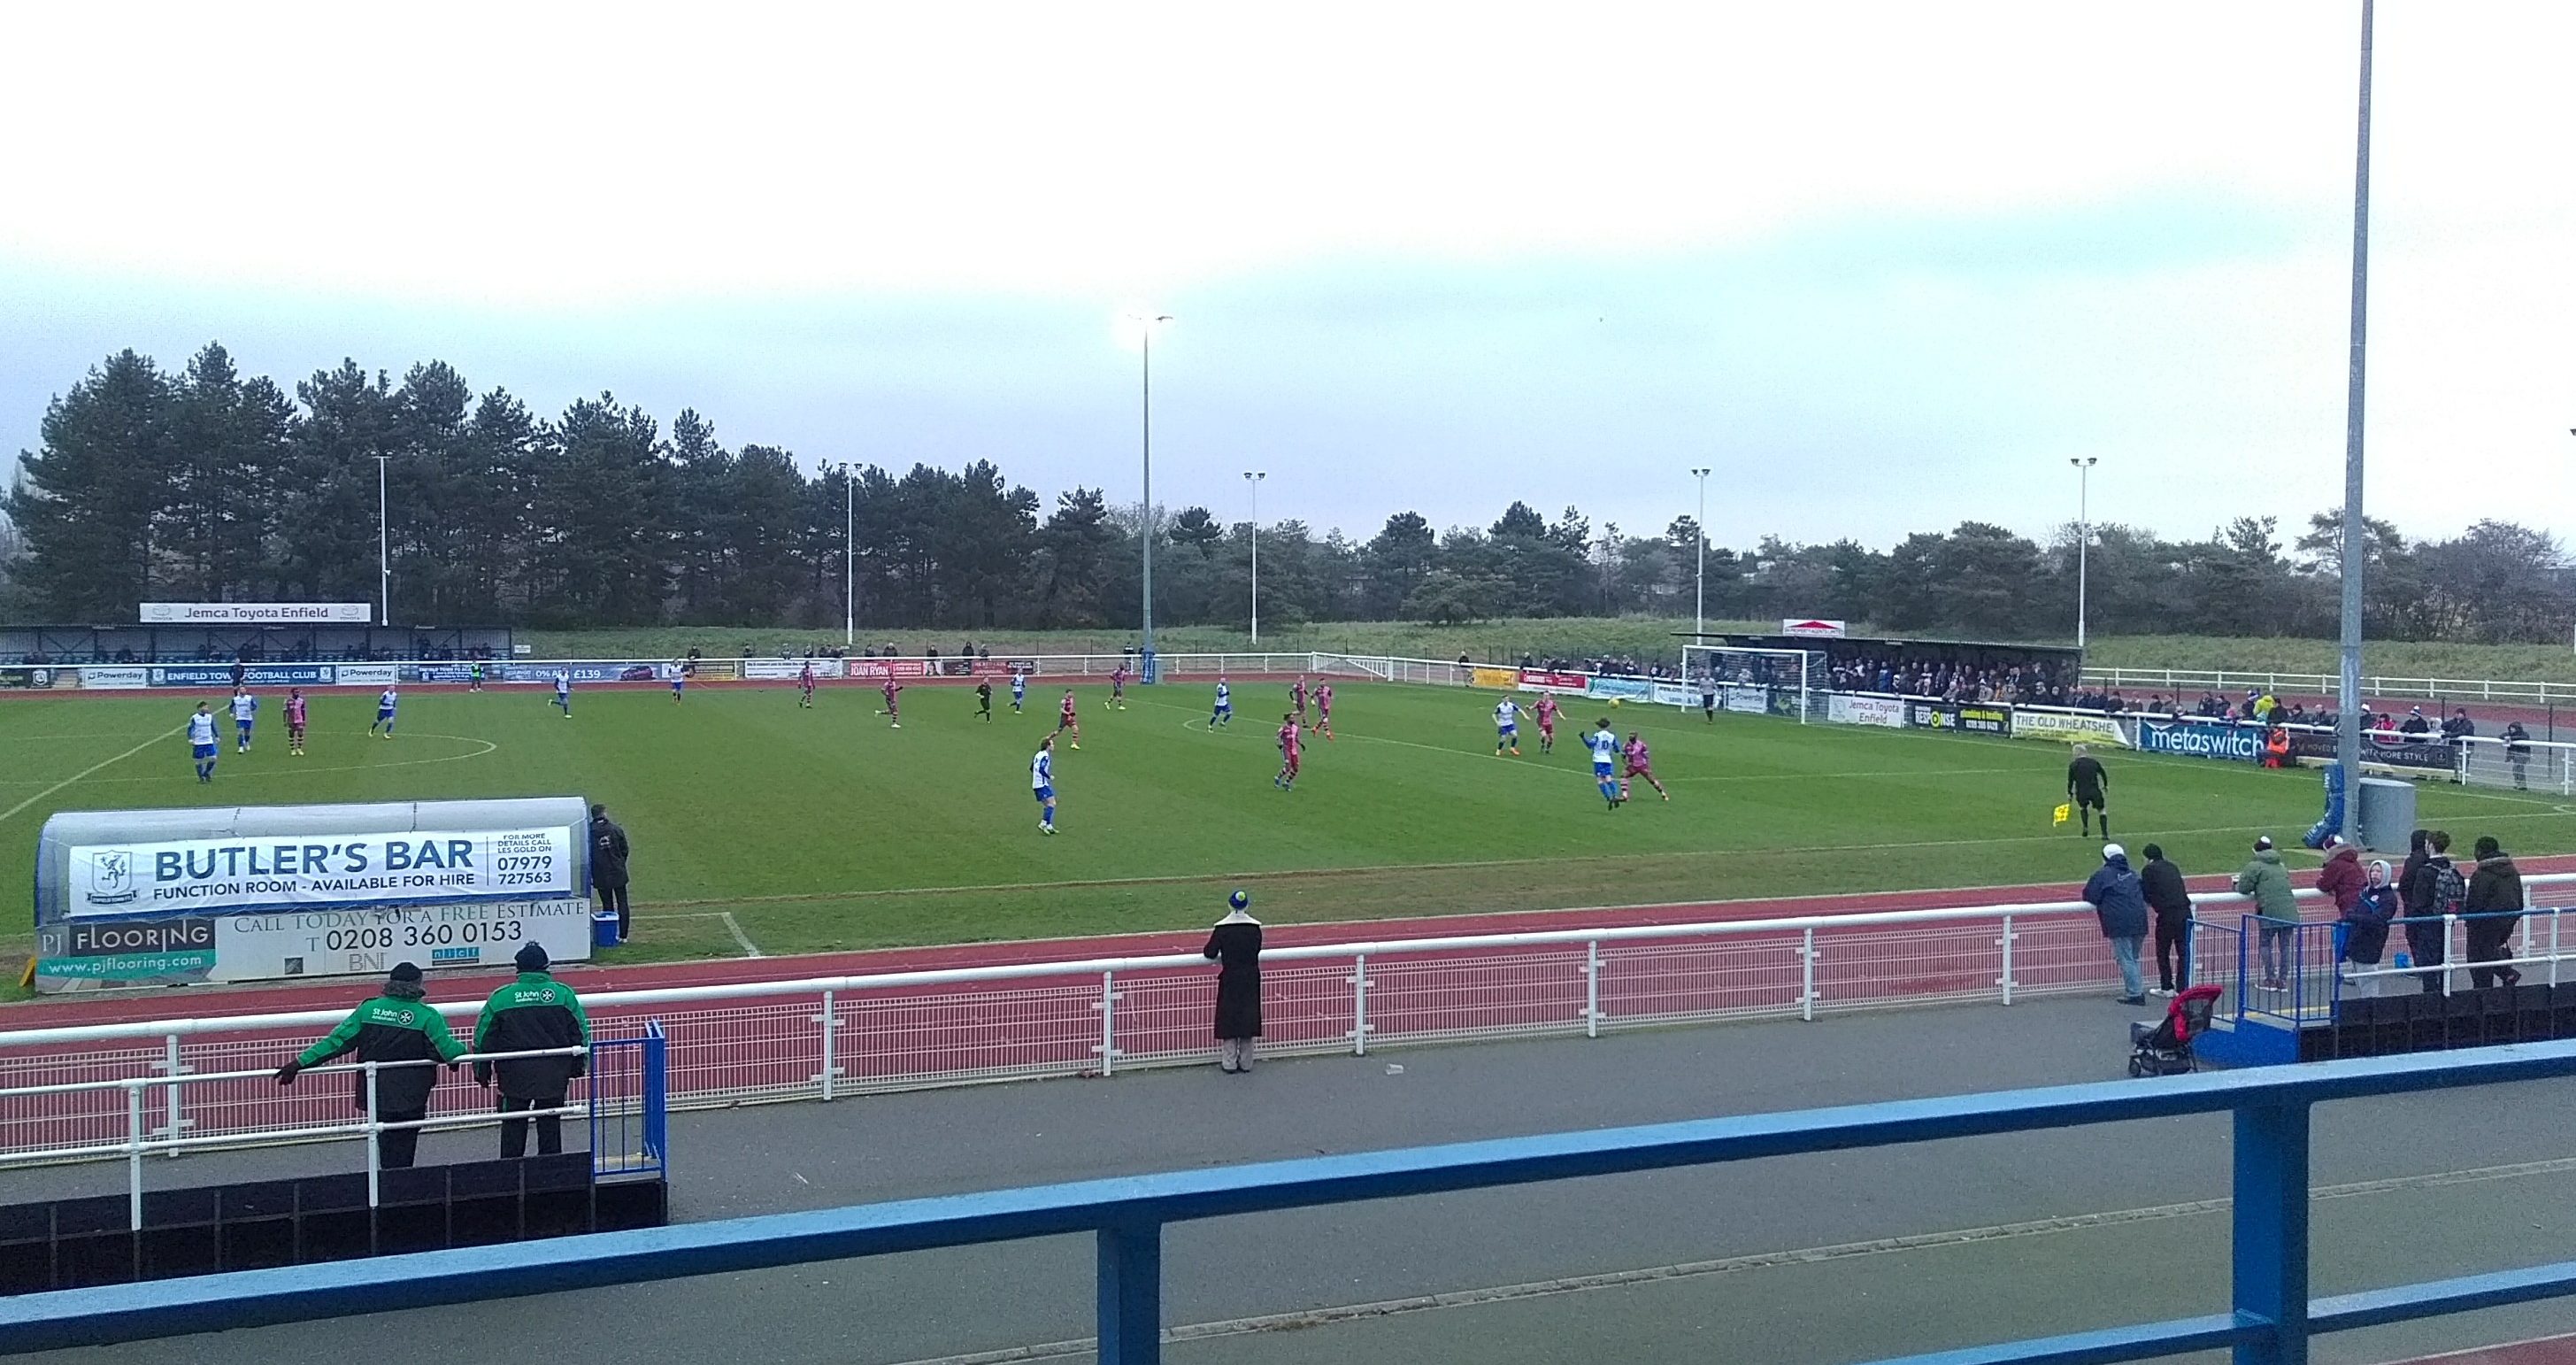 Enfield Town FC competing at Queen Elizabeth II Stadium in Donkey Lane